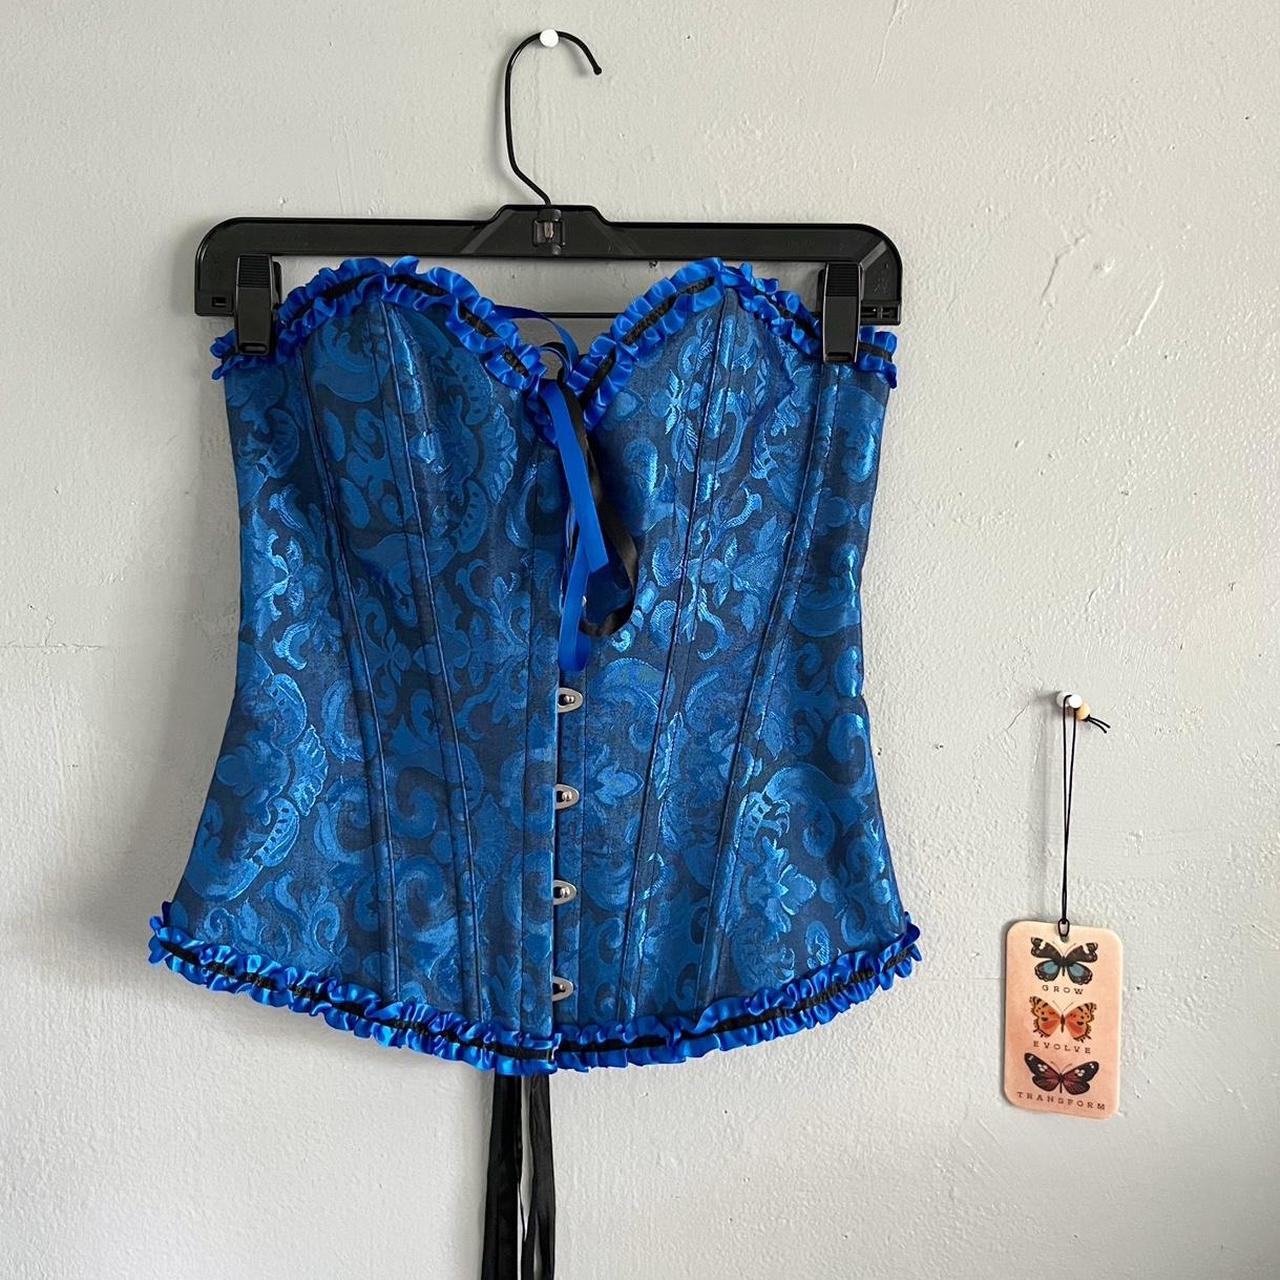 A Loves A Women's Blue and Black Corset